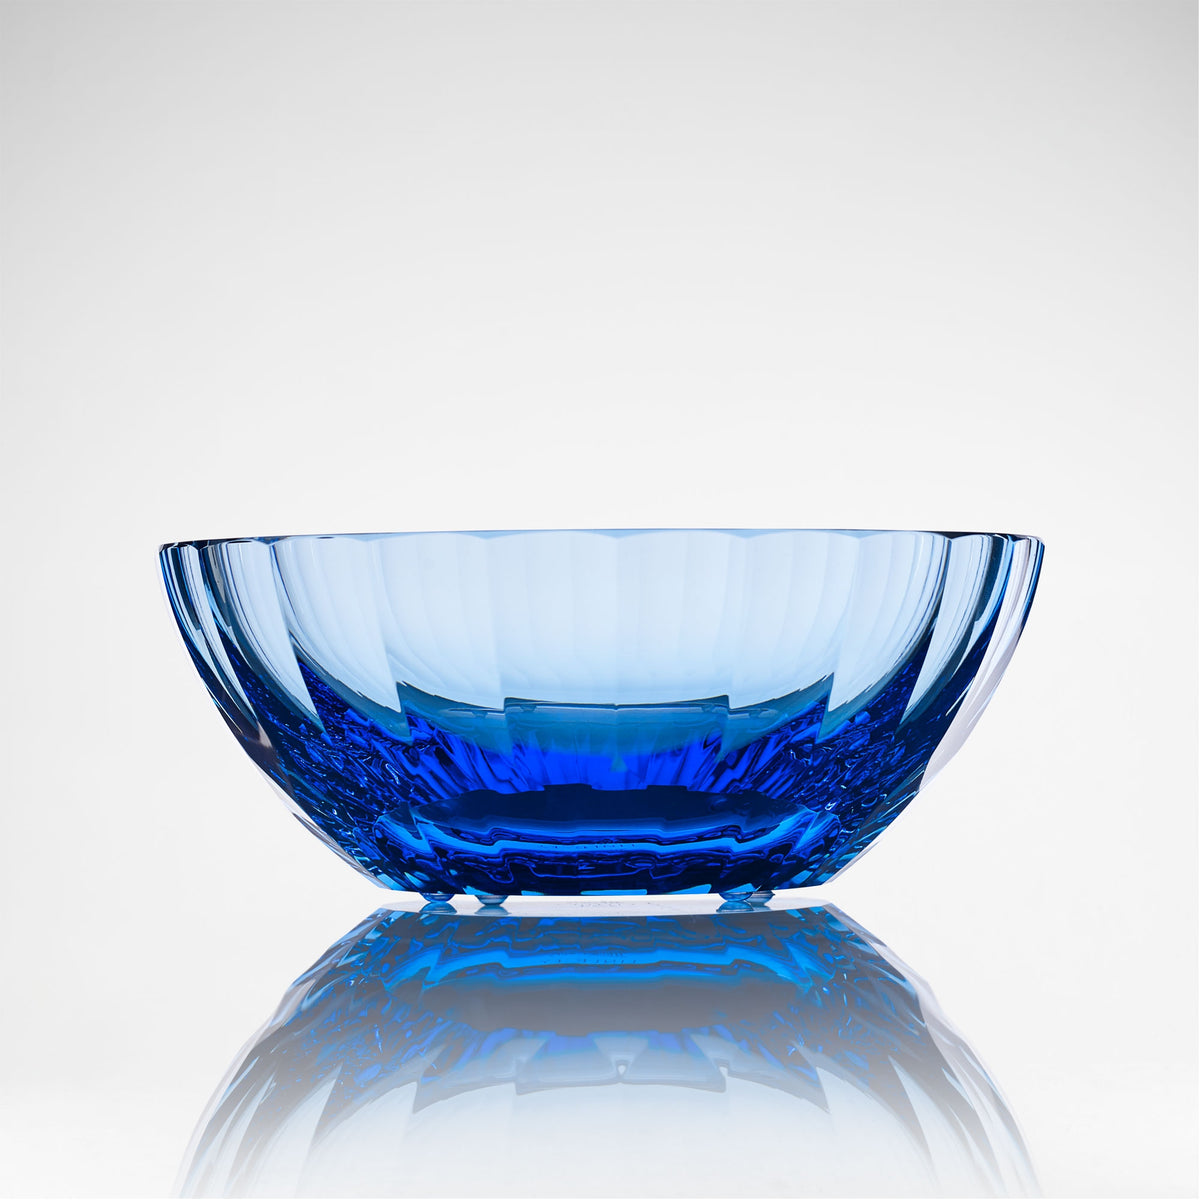 Girih Bowl | Luxury Home Accessories & Gifts | LINLEY